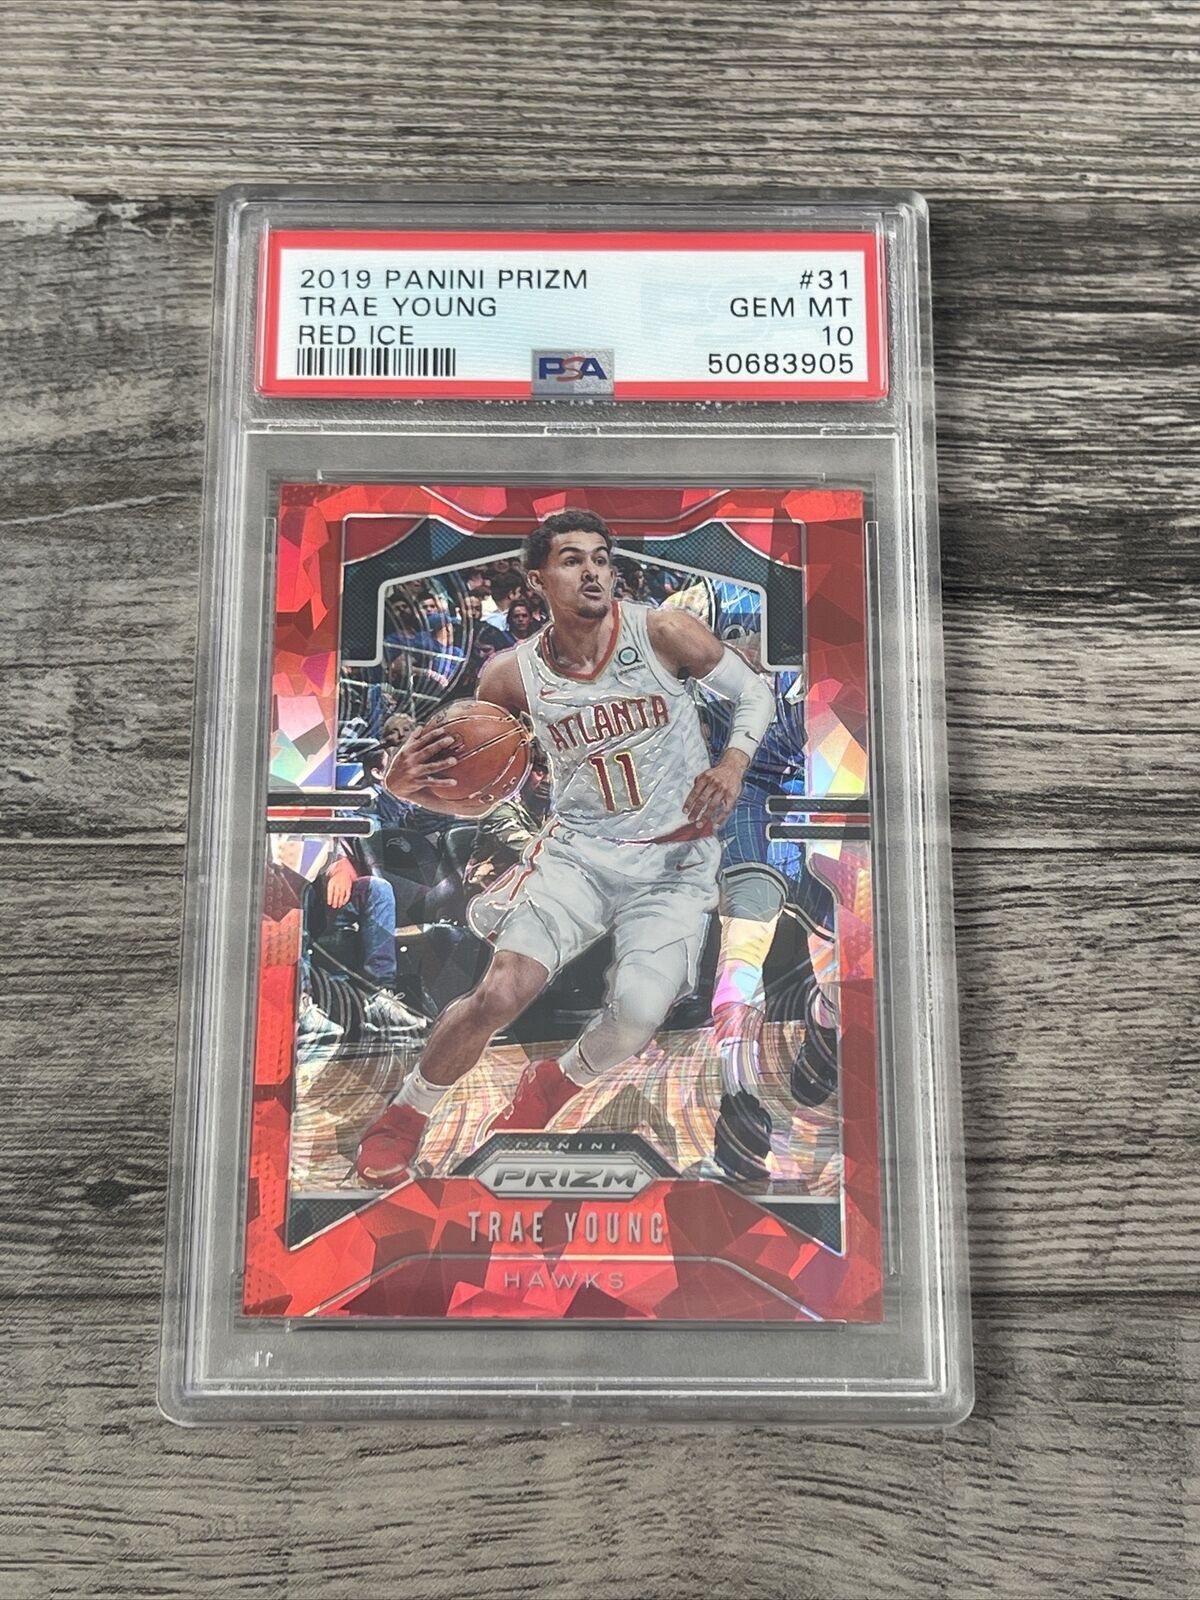 2019 Panini Prizm Trae Young Red Ice PSA 10